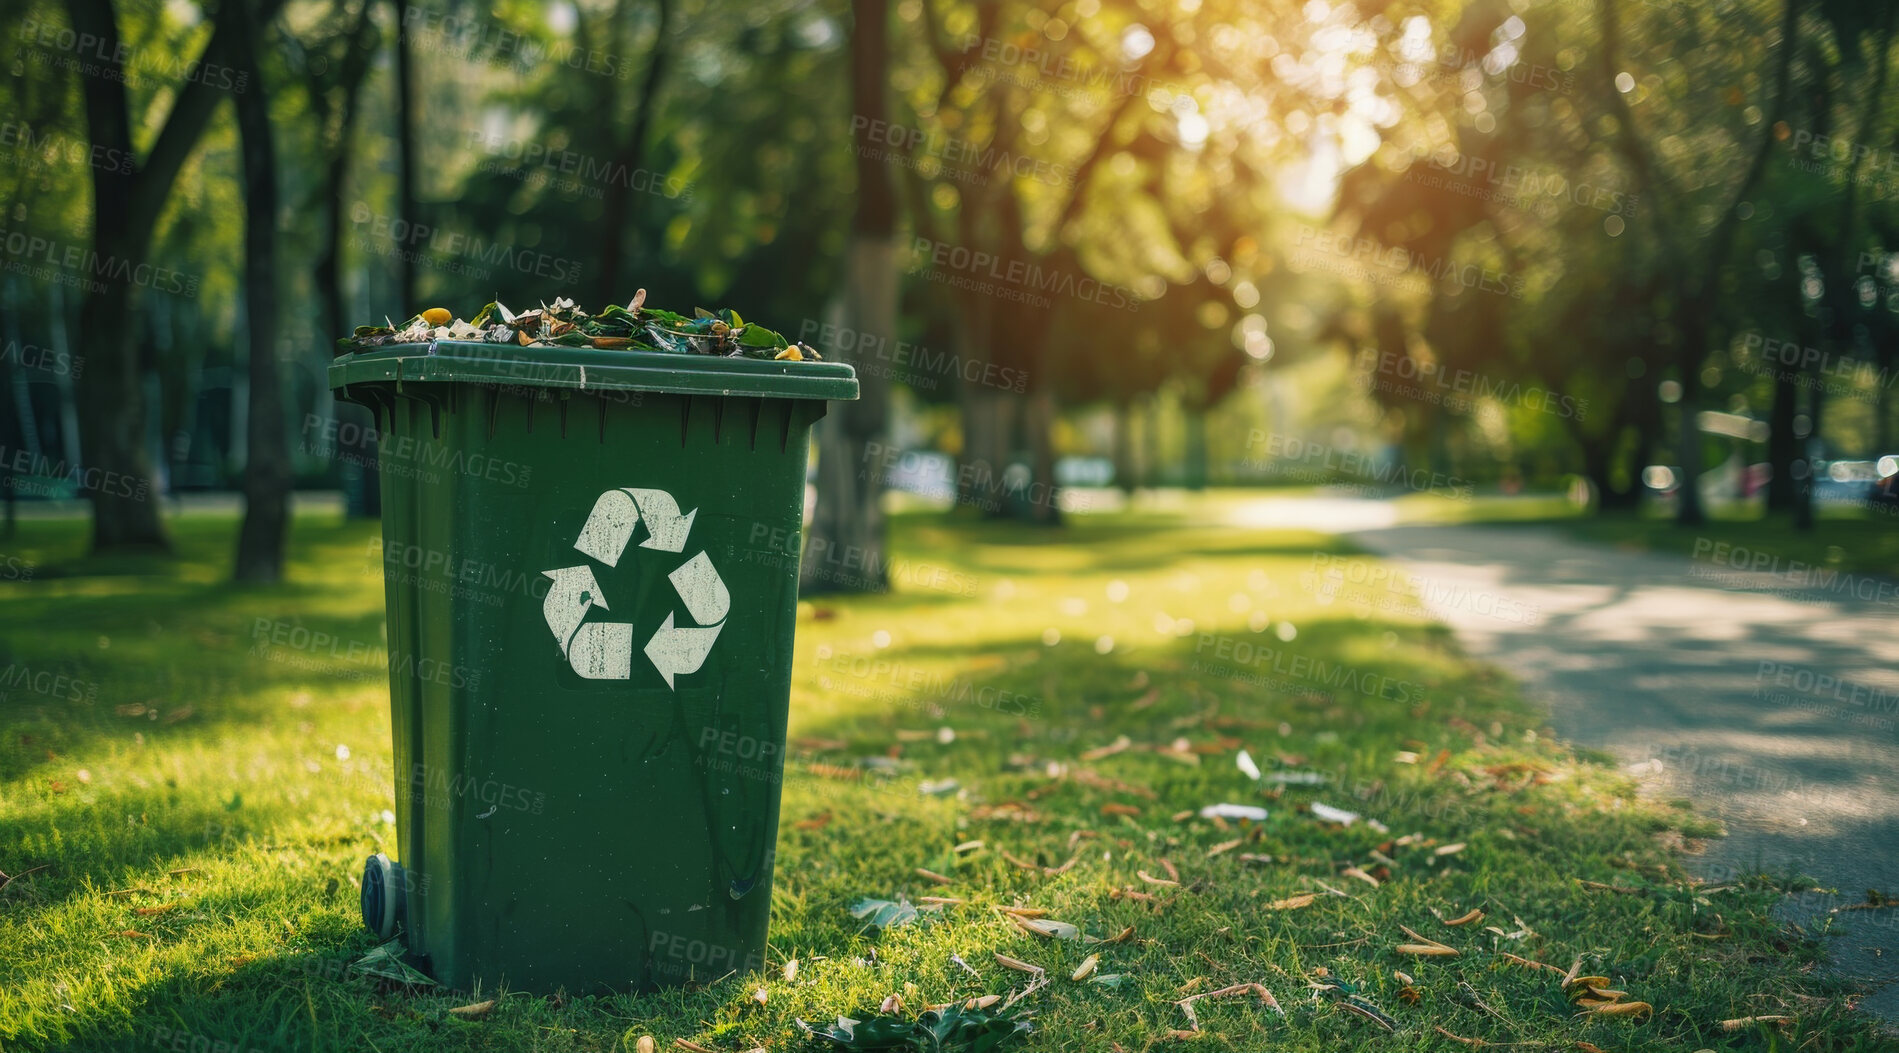 Buy stock photo Trash, dumpster and clean nature background mockup for environmental, awareness and sustainability concept. Green grass, mockup and symbol with copyspace for Earth Day, eco system or ecology logo